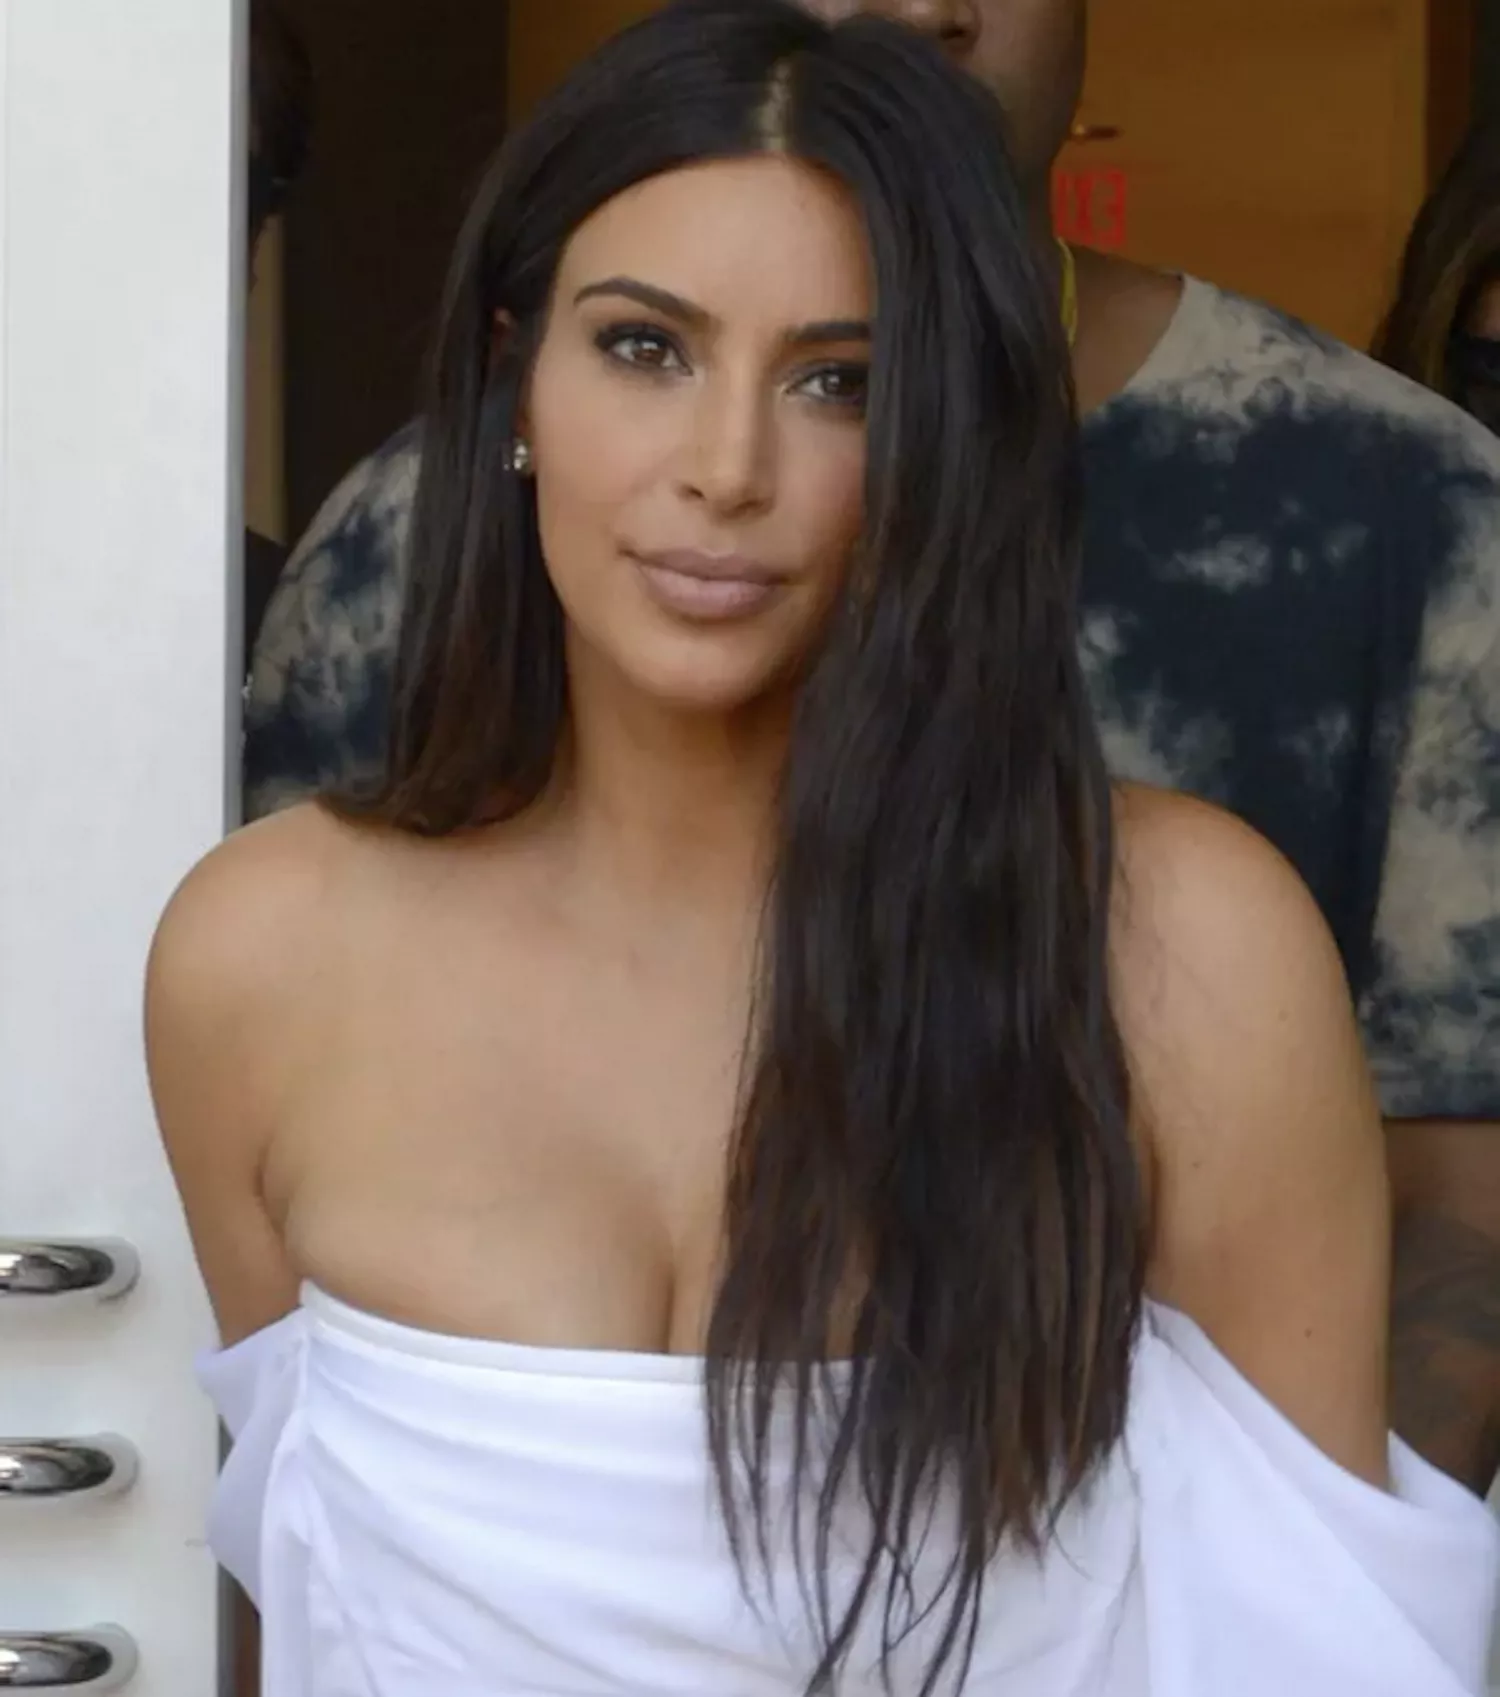 Kim Kardashian's Greatest Hair Moments: Textured and Relaxed Waves